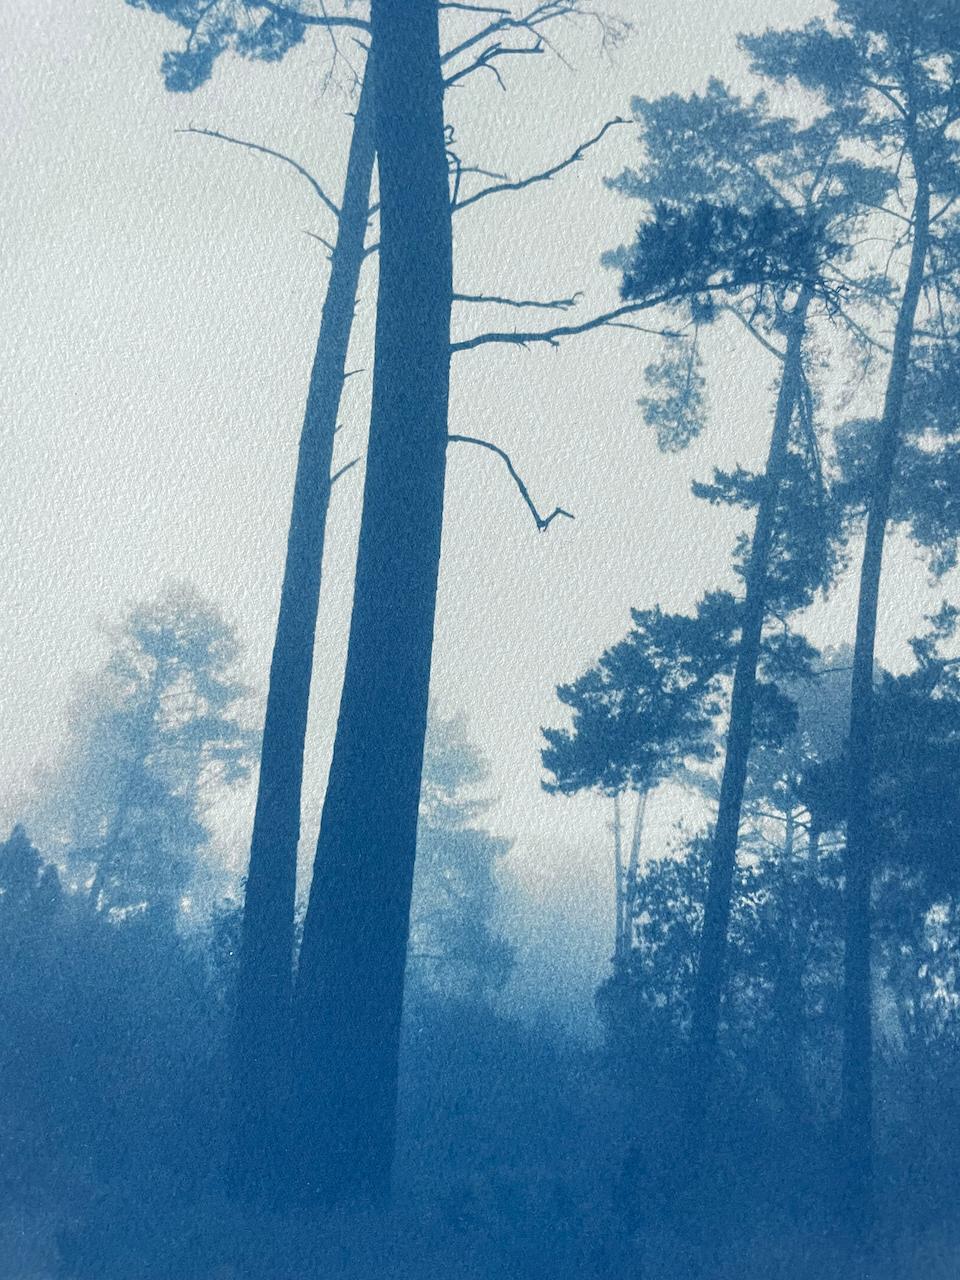 Slender Pines (Hand-printed cyanotype,  18 x 12 inches) - Realist Photograph by Christine So